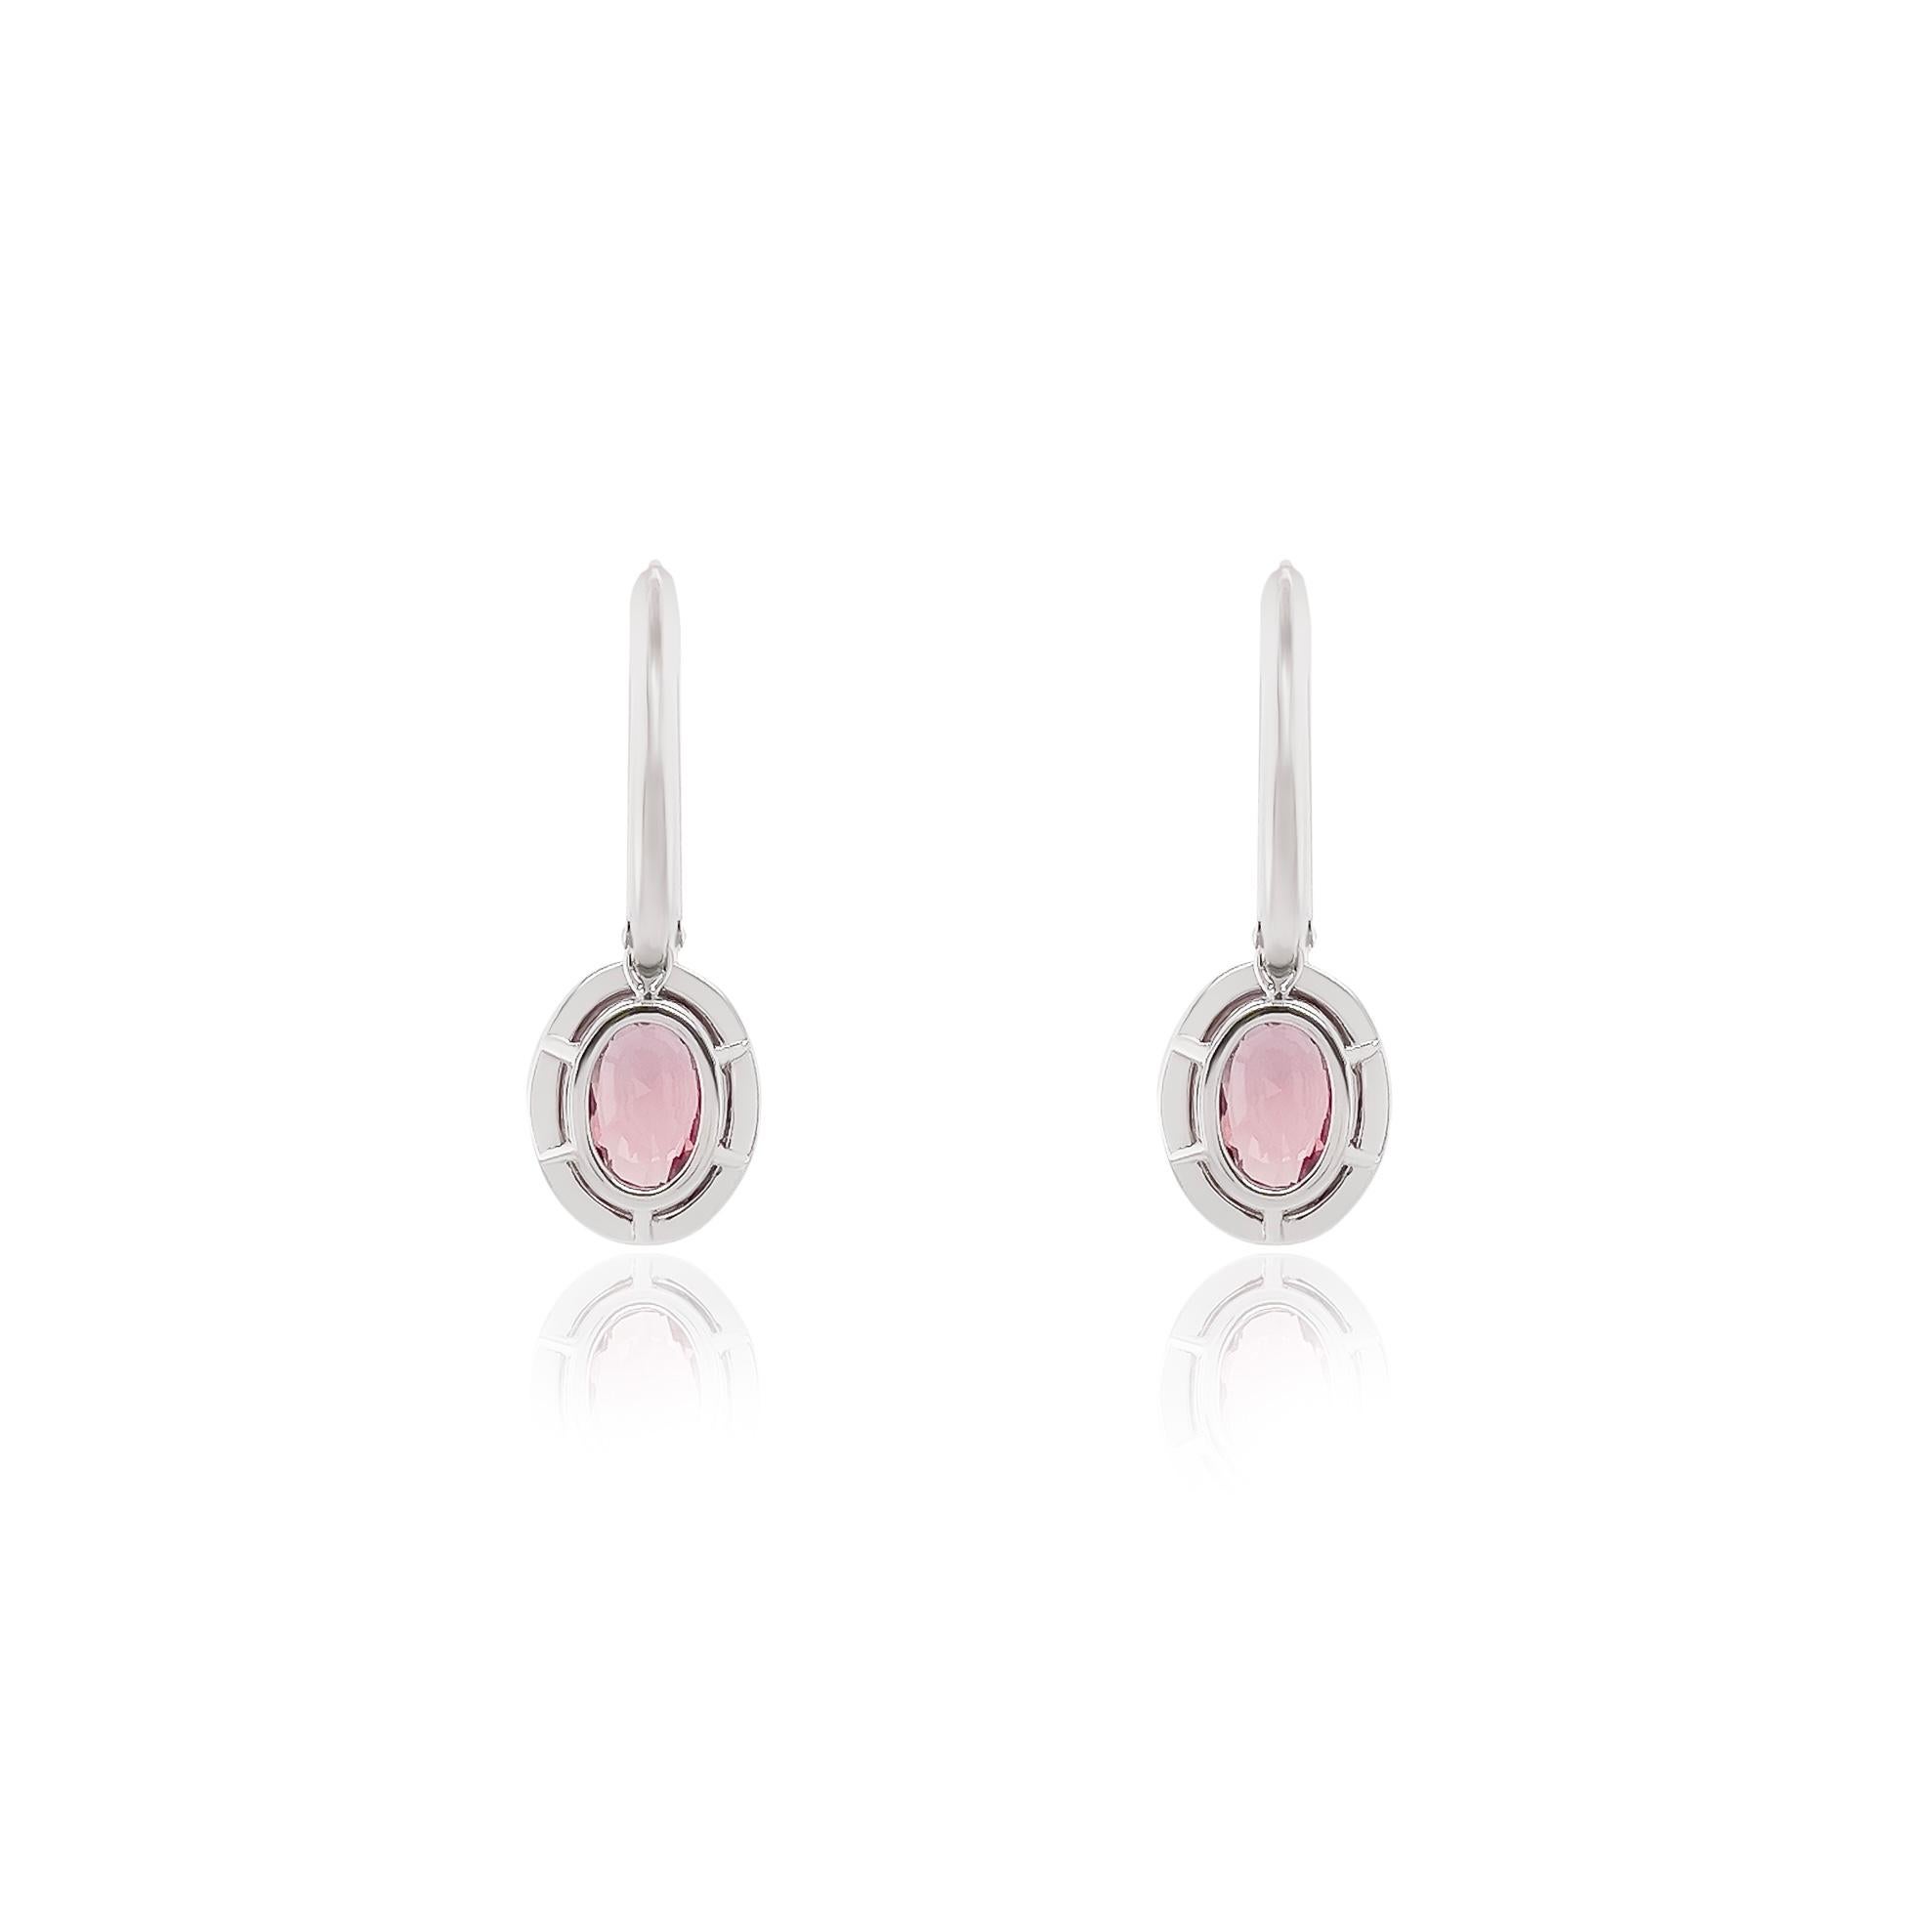 Padparadscha sapphires are considered one of the most sought after and most valuable gemstones in the world due to their limited availability. 

This very RARE perfectly matched pair of padparadscha sapphire earrings weight 2.01 cts and 2.02 cts.